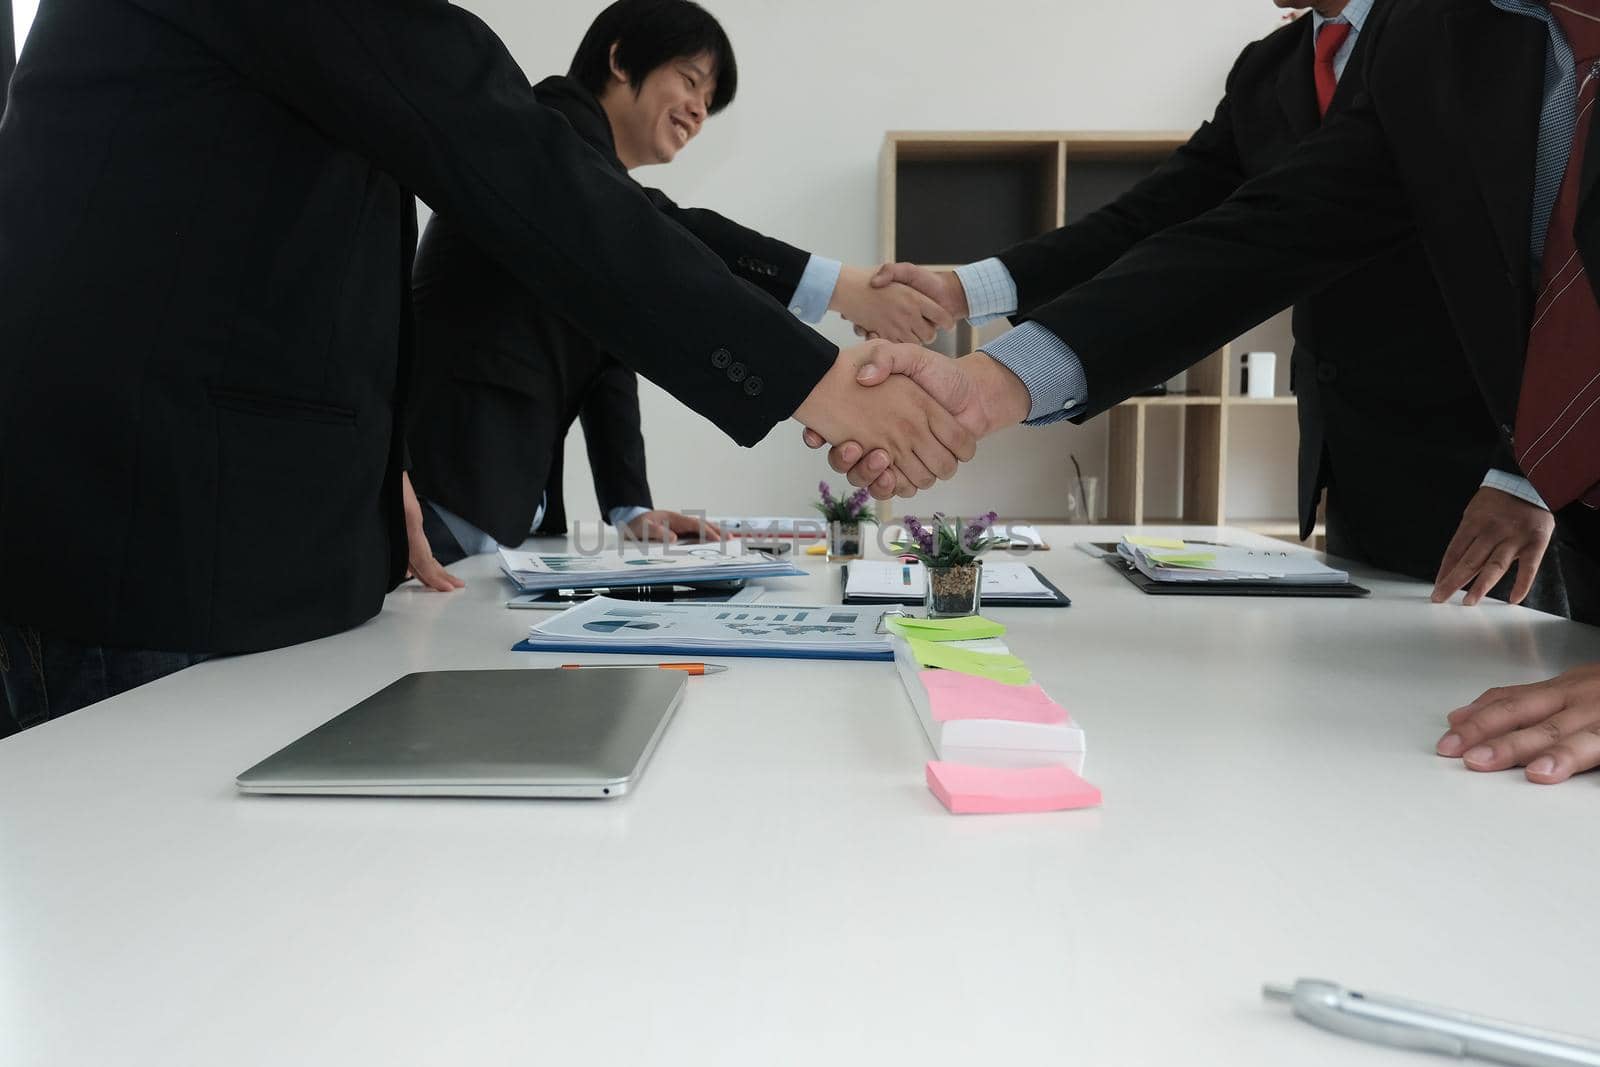 Business people shaking hands after finishing up meeting. Two colleagues handshaking after conference. Greeting deal, teamwork, partnership, corporate concept. by pp99